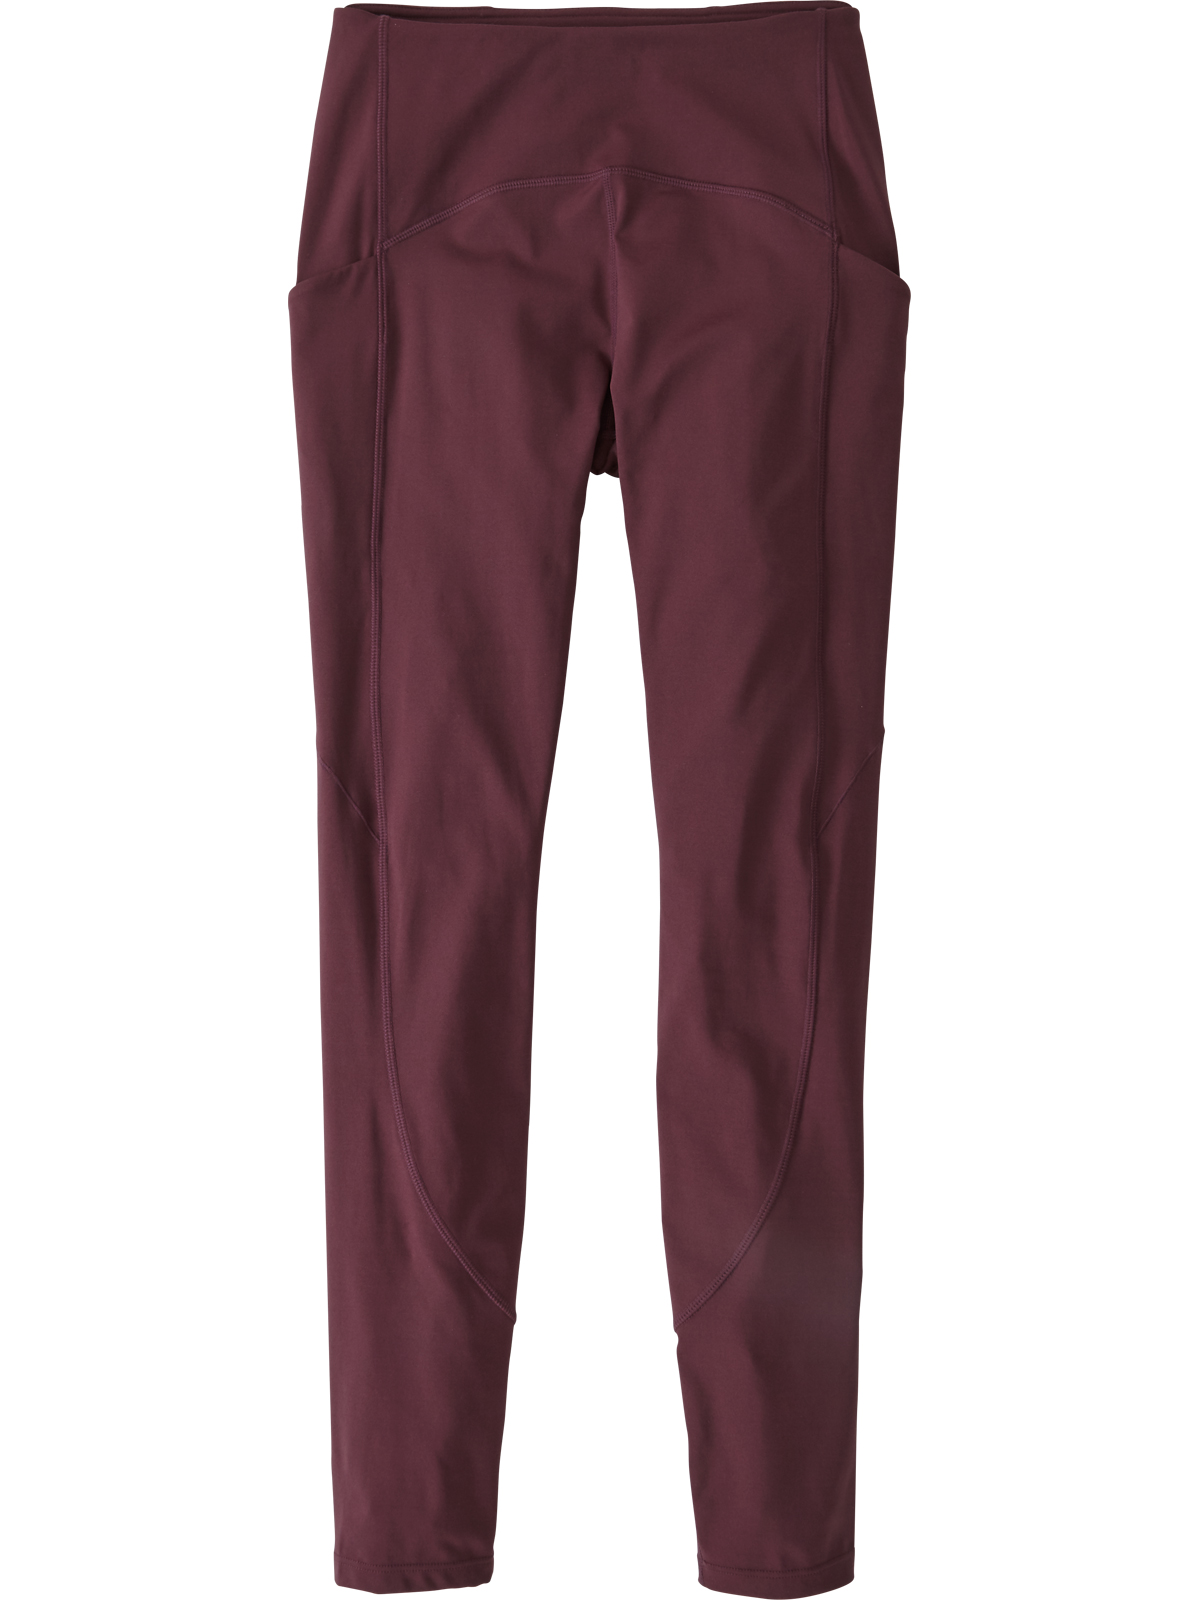 Women's hiking pants ready for your wildest adventures | Title Nine